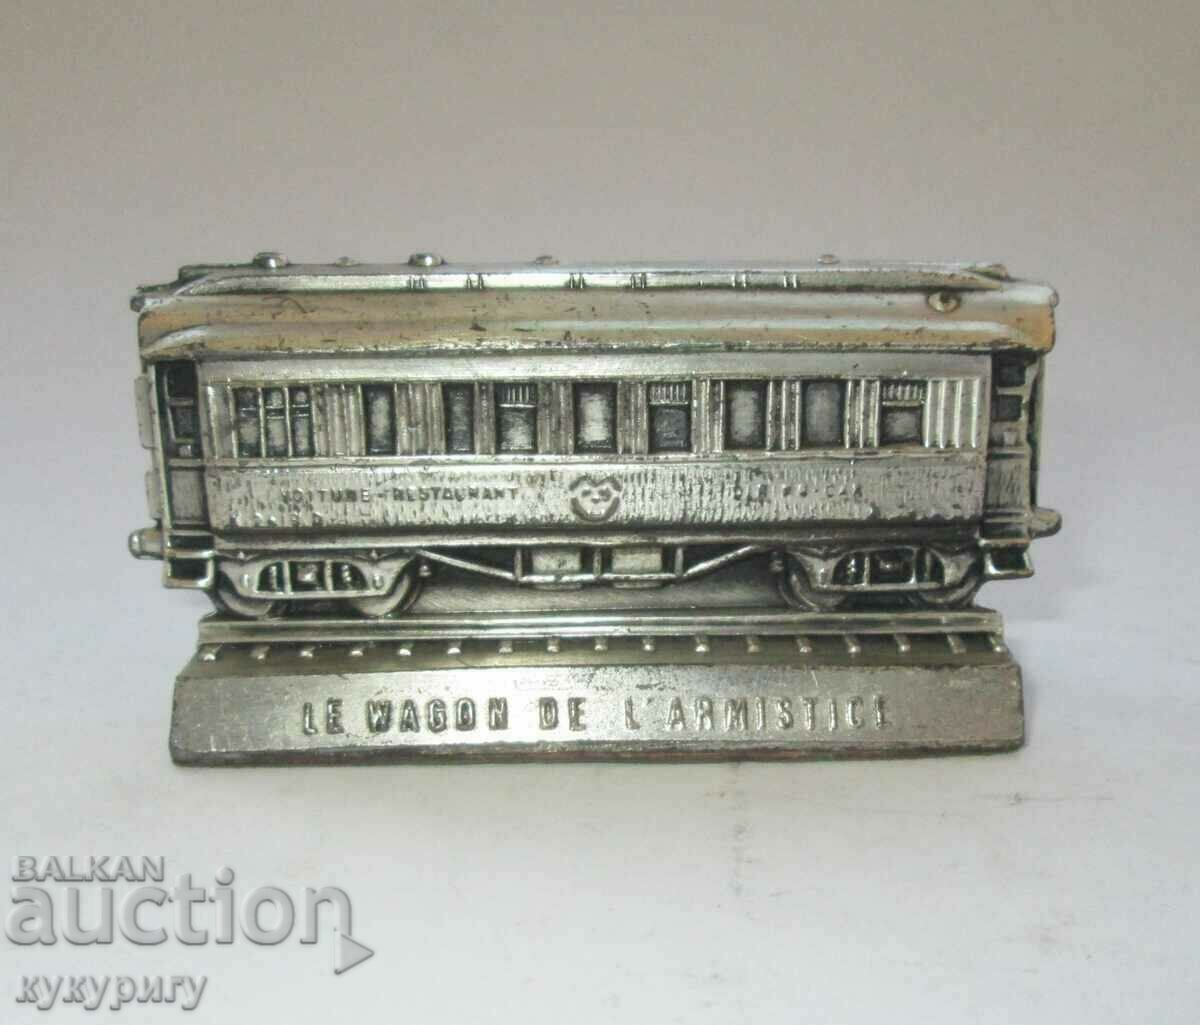 Old historical railway car model paperweight for PSV